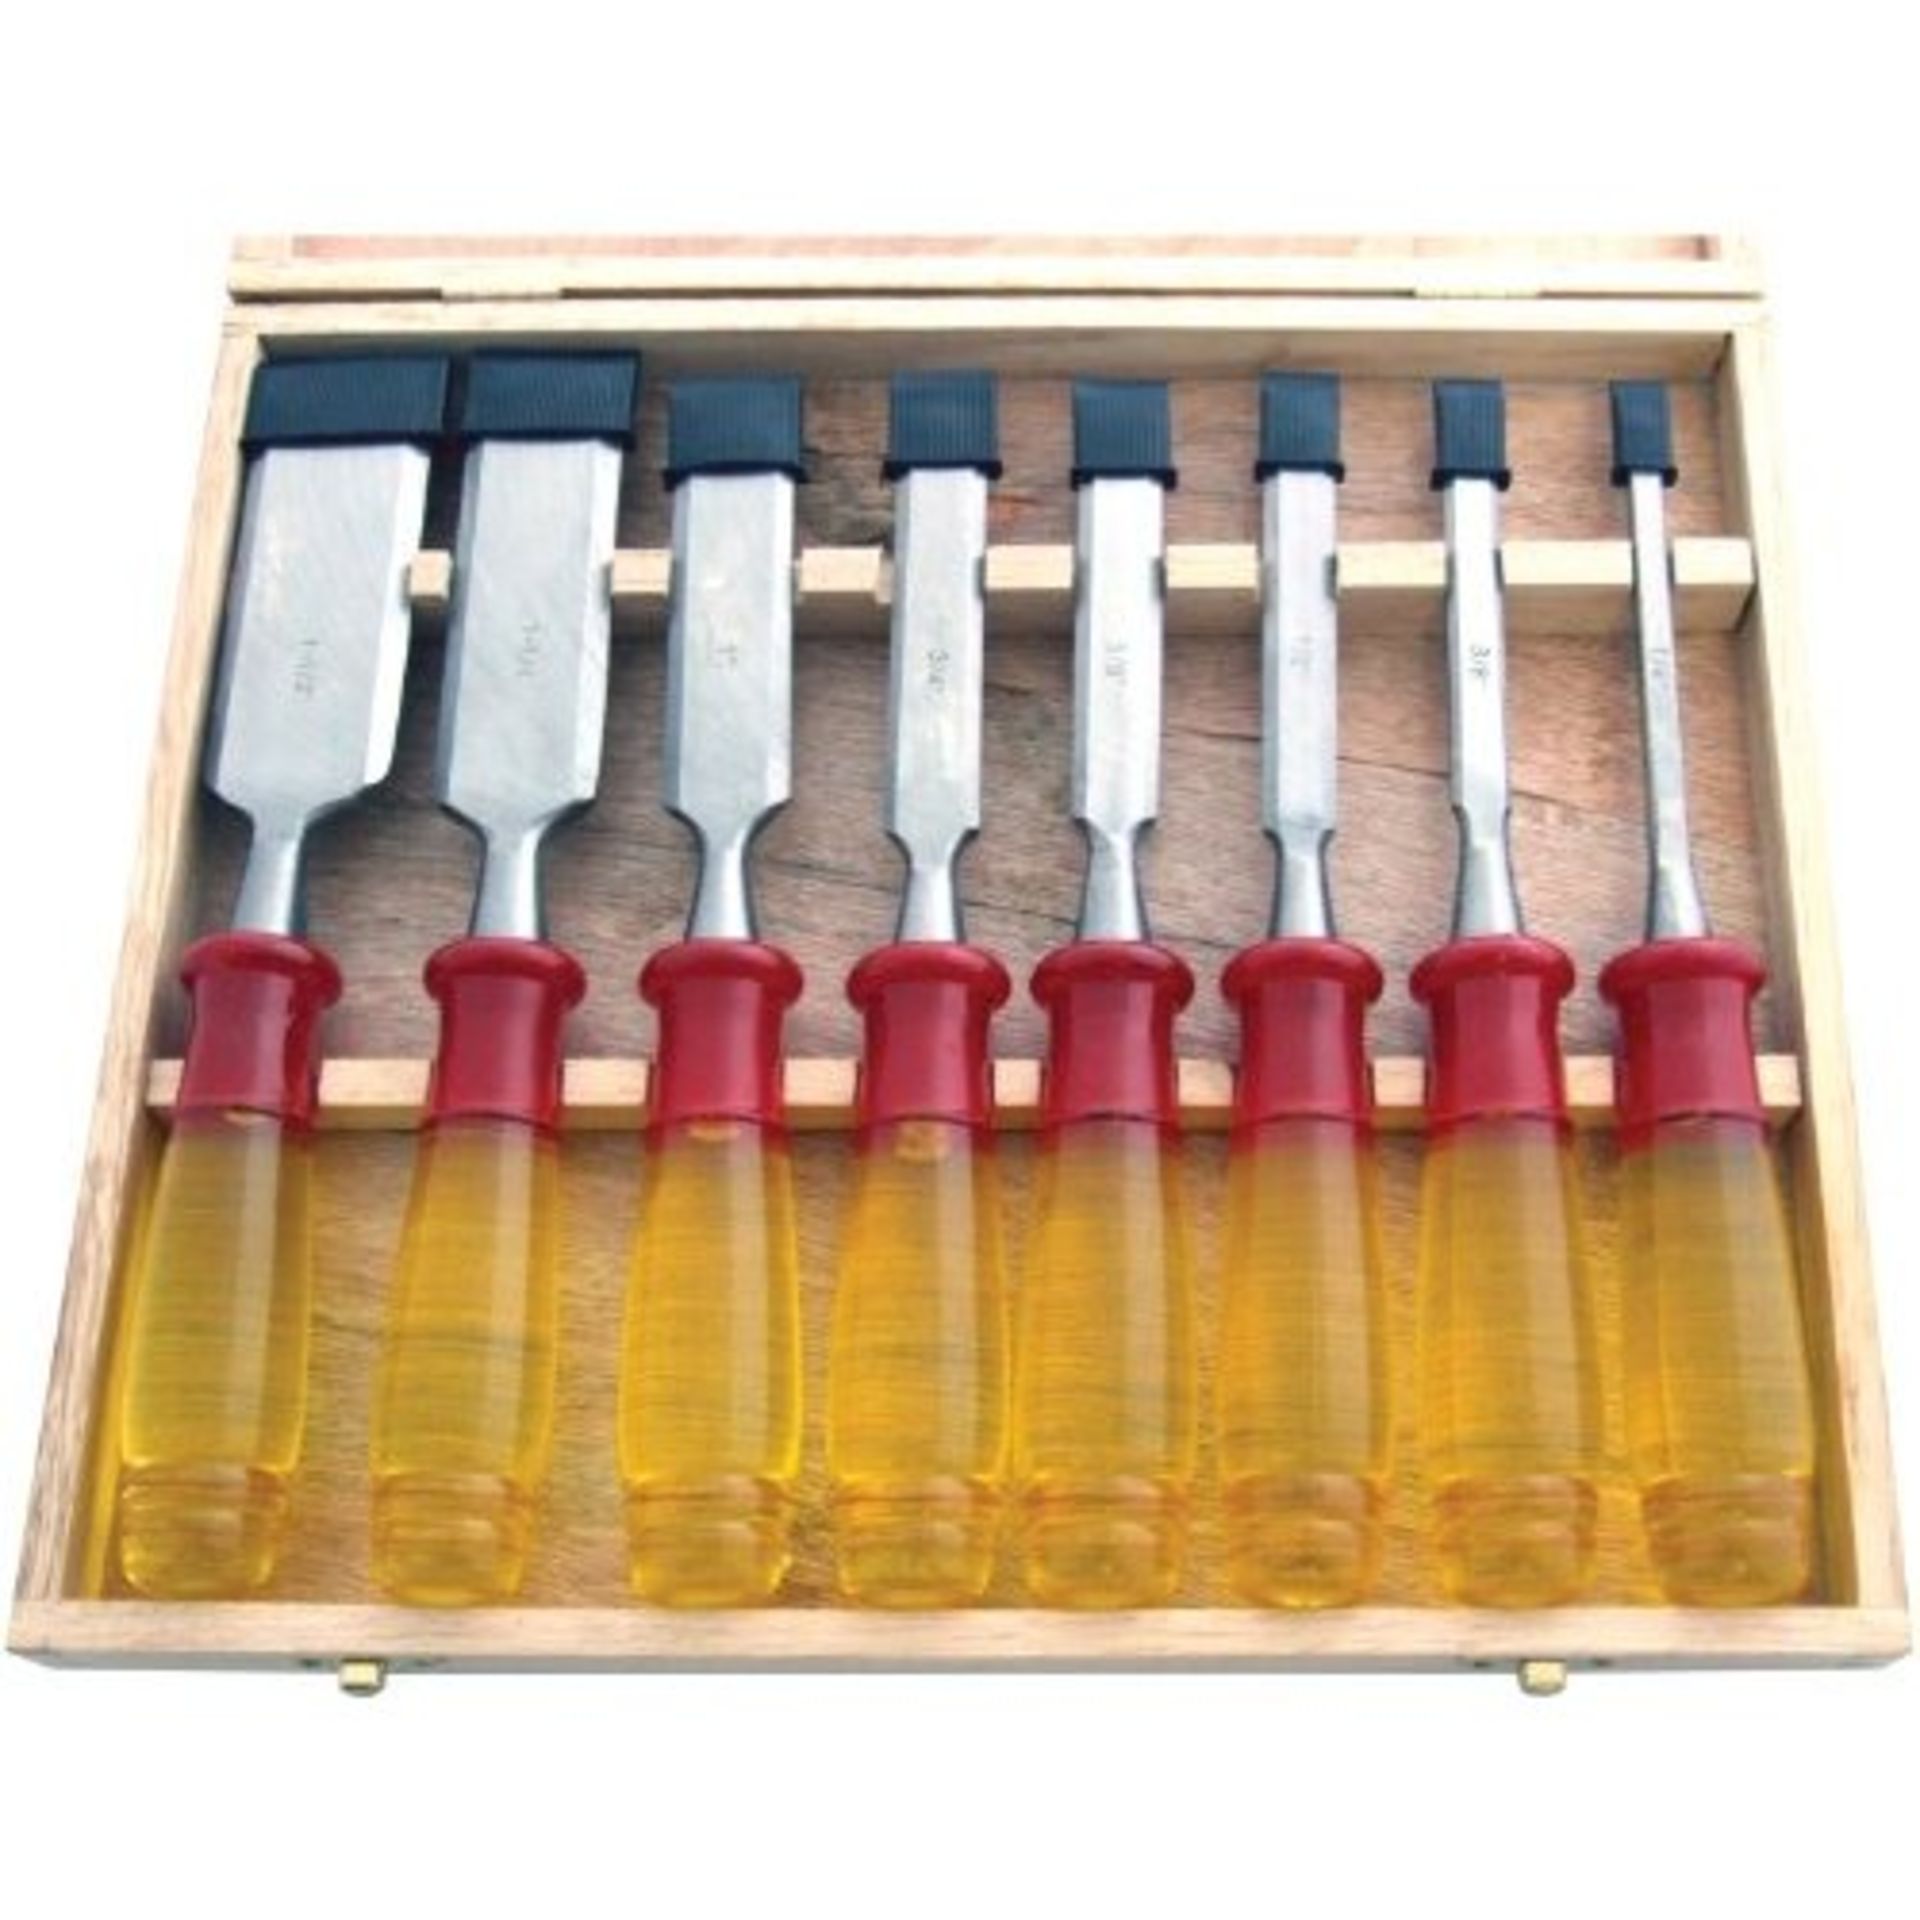 V  Grade A 8 Piece Professional Chisel Set with wooden storage case - Image 2 of 4